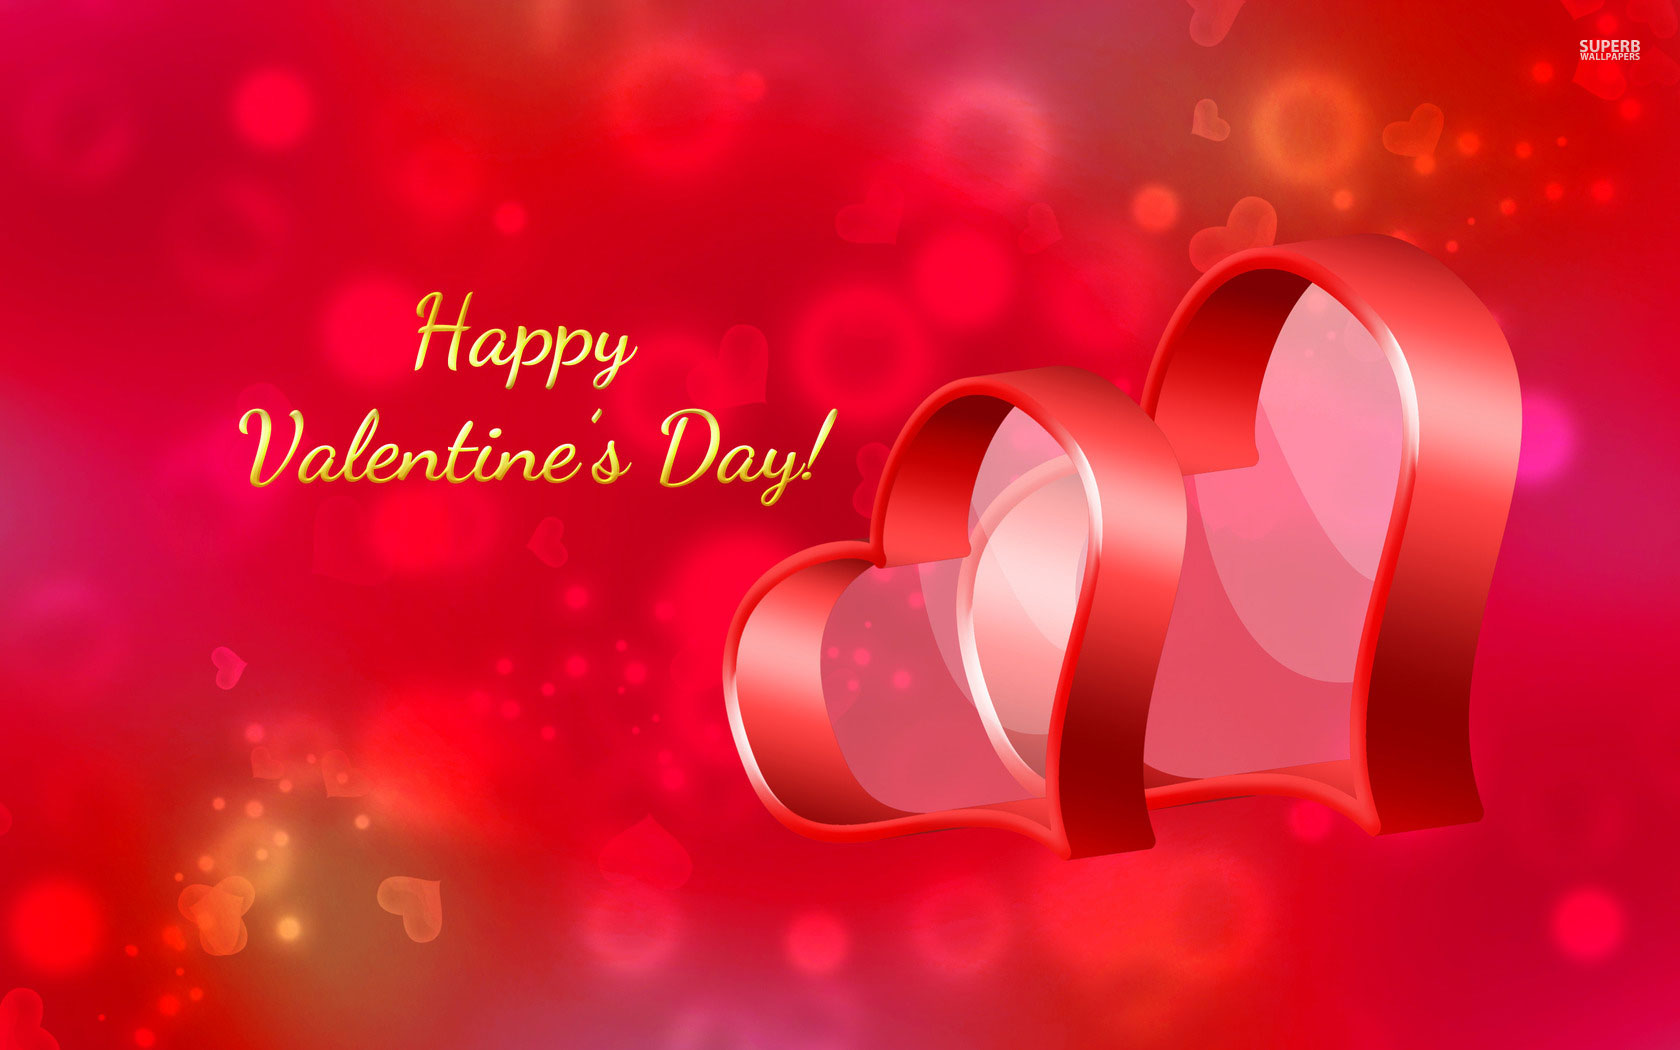 60+ Romantic Valentines Day Wallpapers and HD Images - Freshmorningquotes